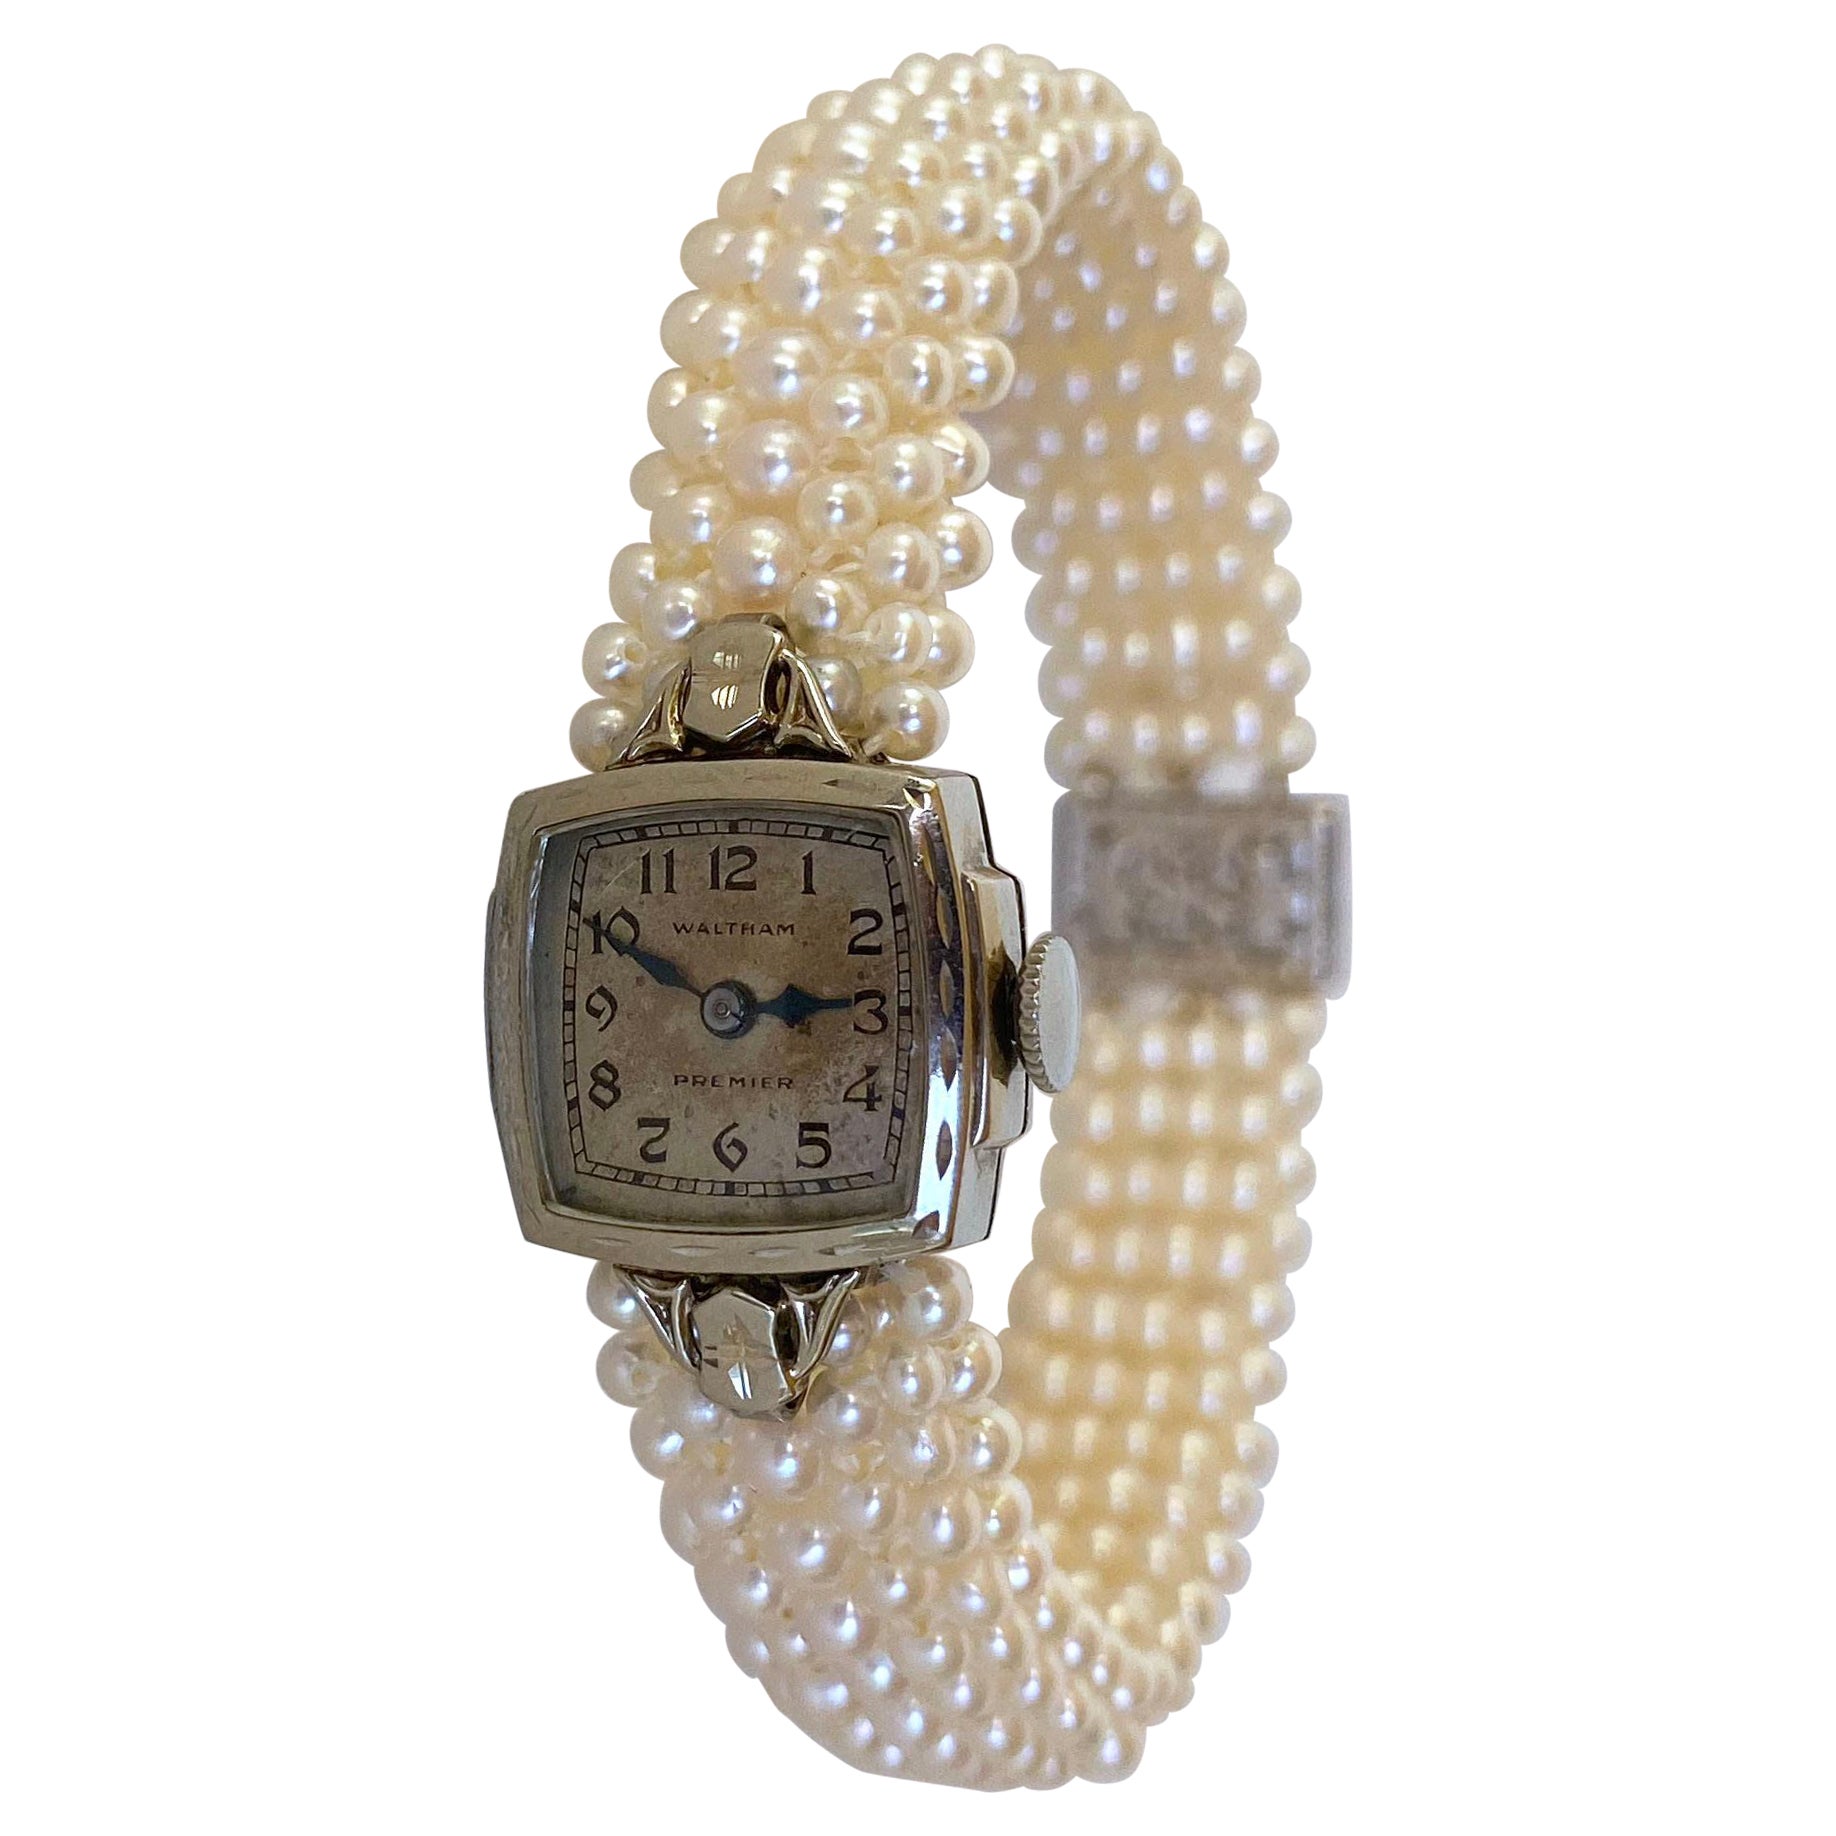 Marina J Woven Pearl  Bracelet with Vintage 14k White Gold working manual Watch 